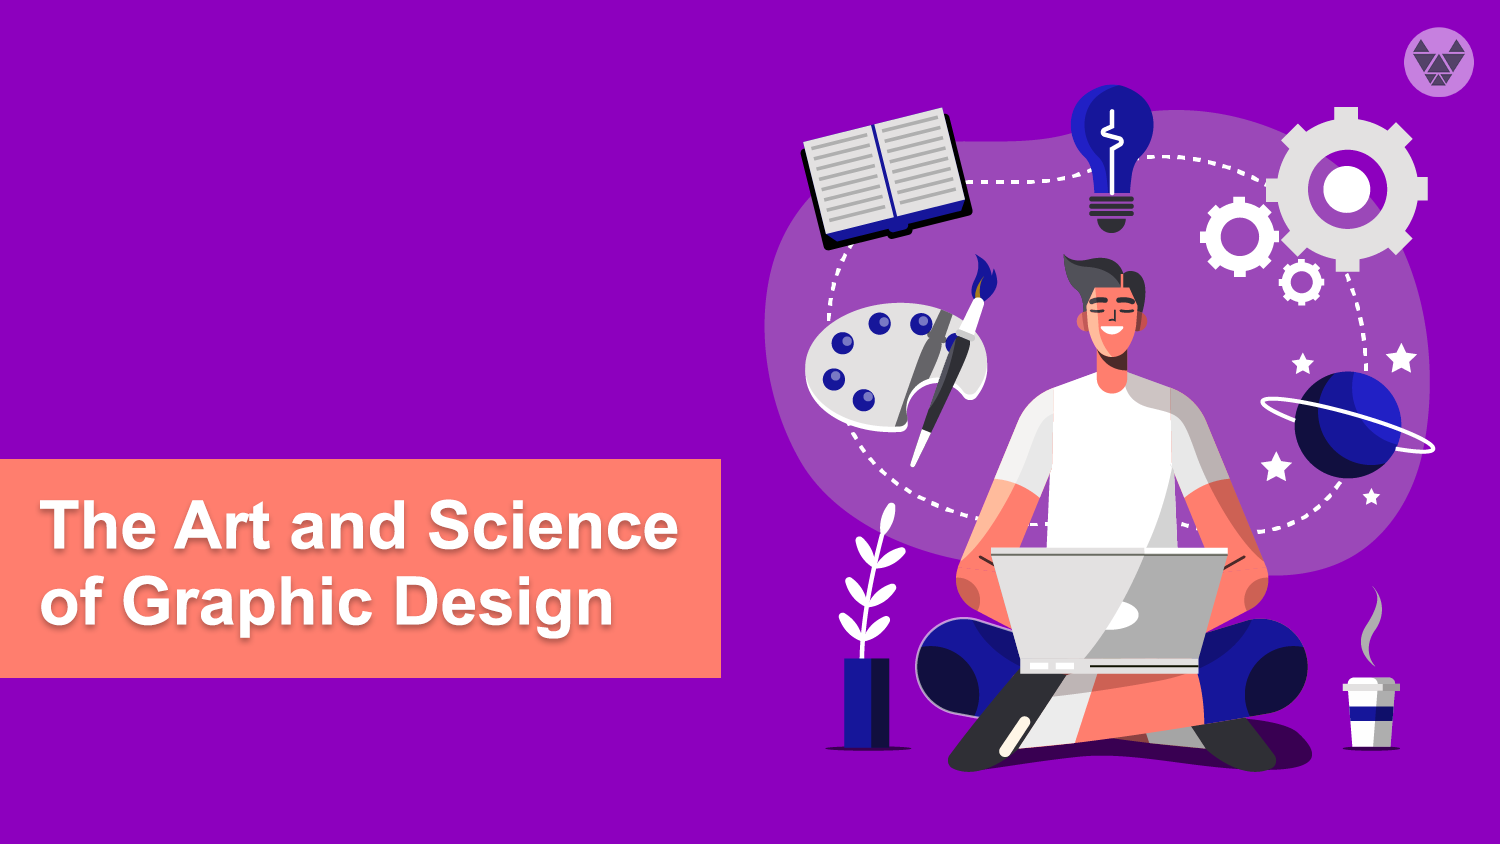 The Art and Science of Graphic Design